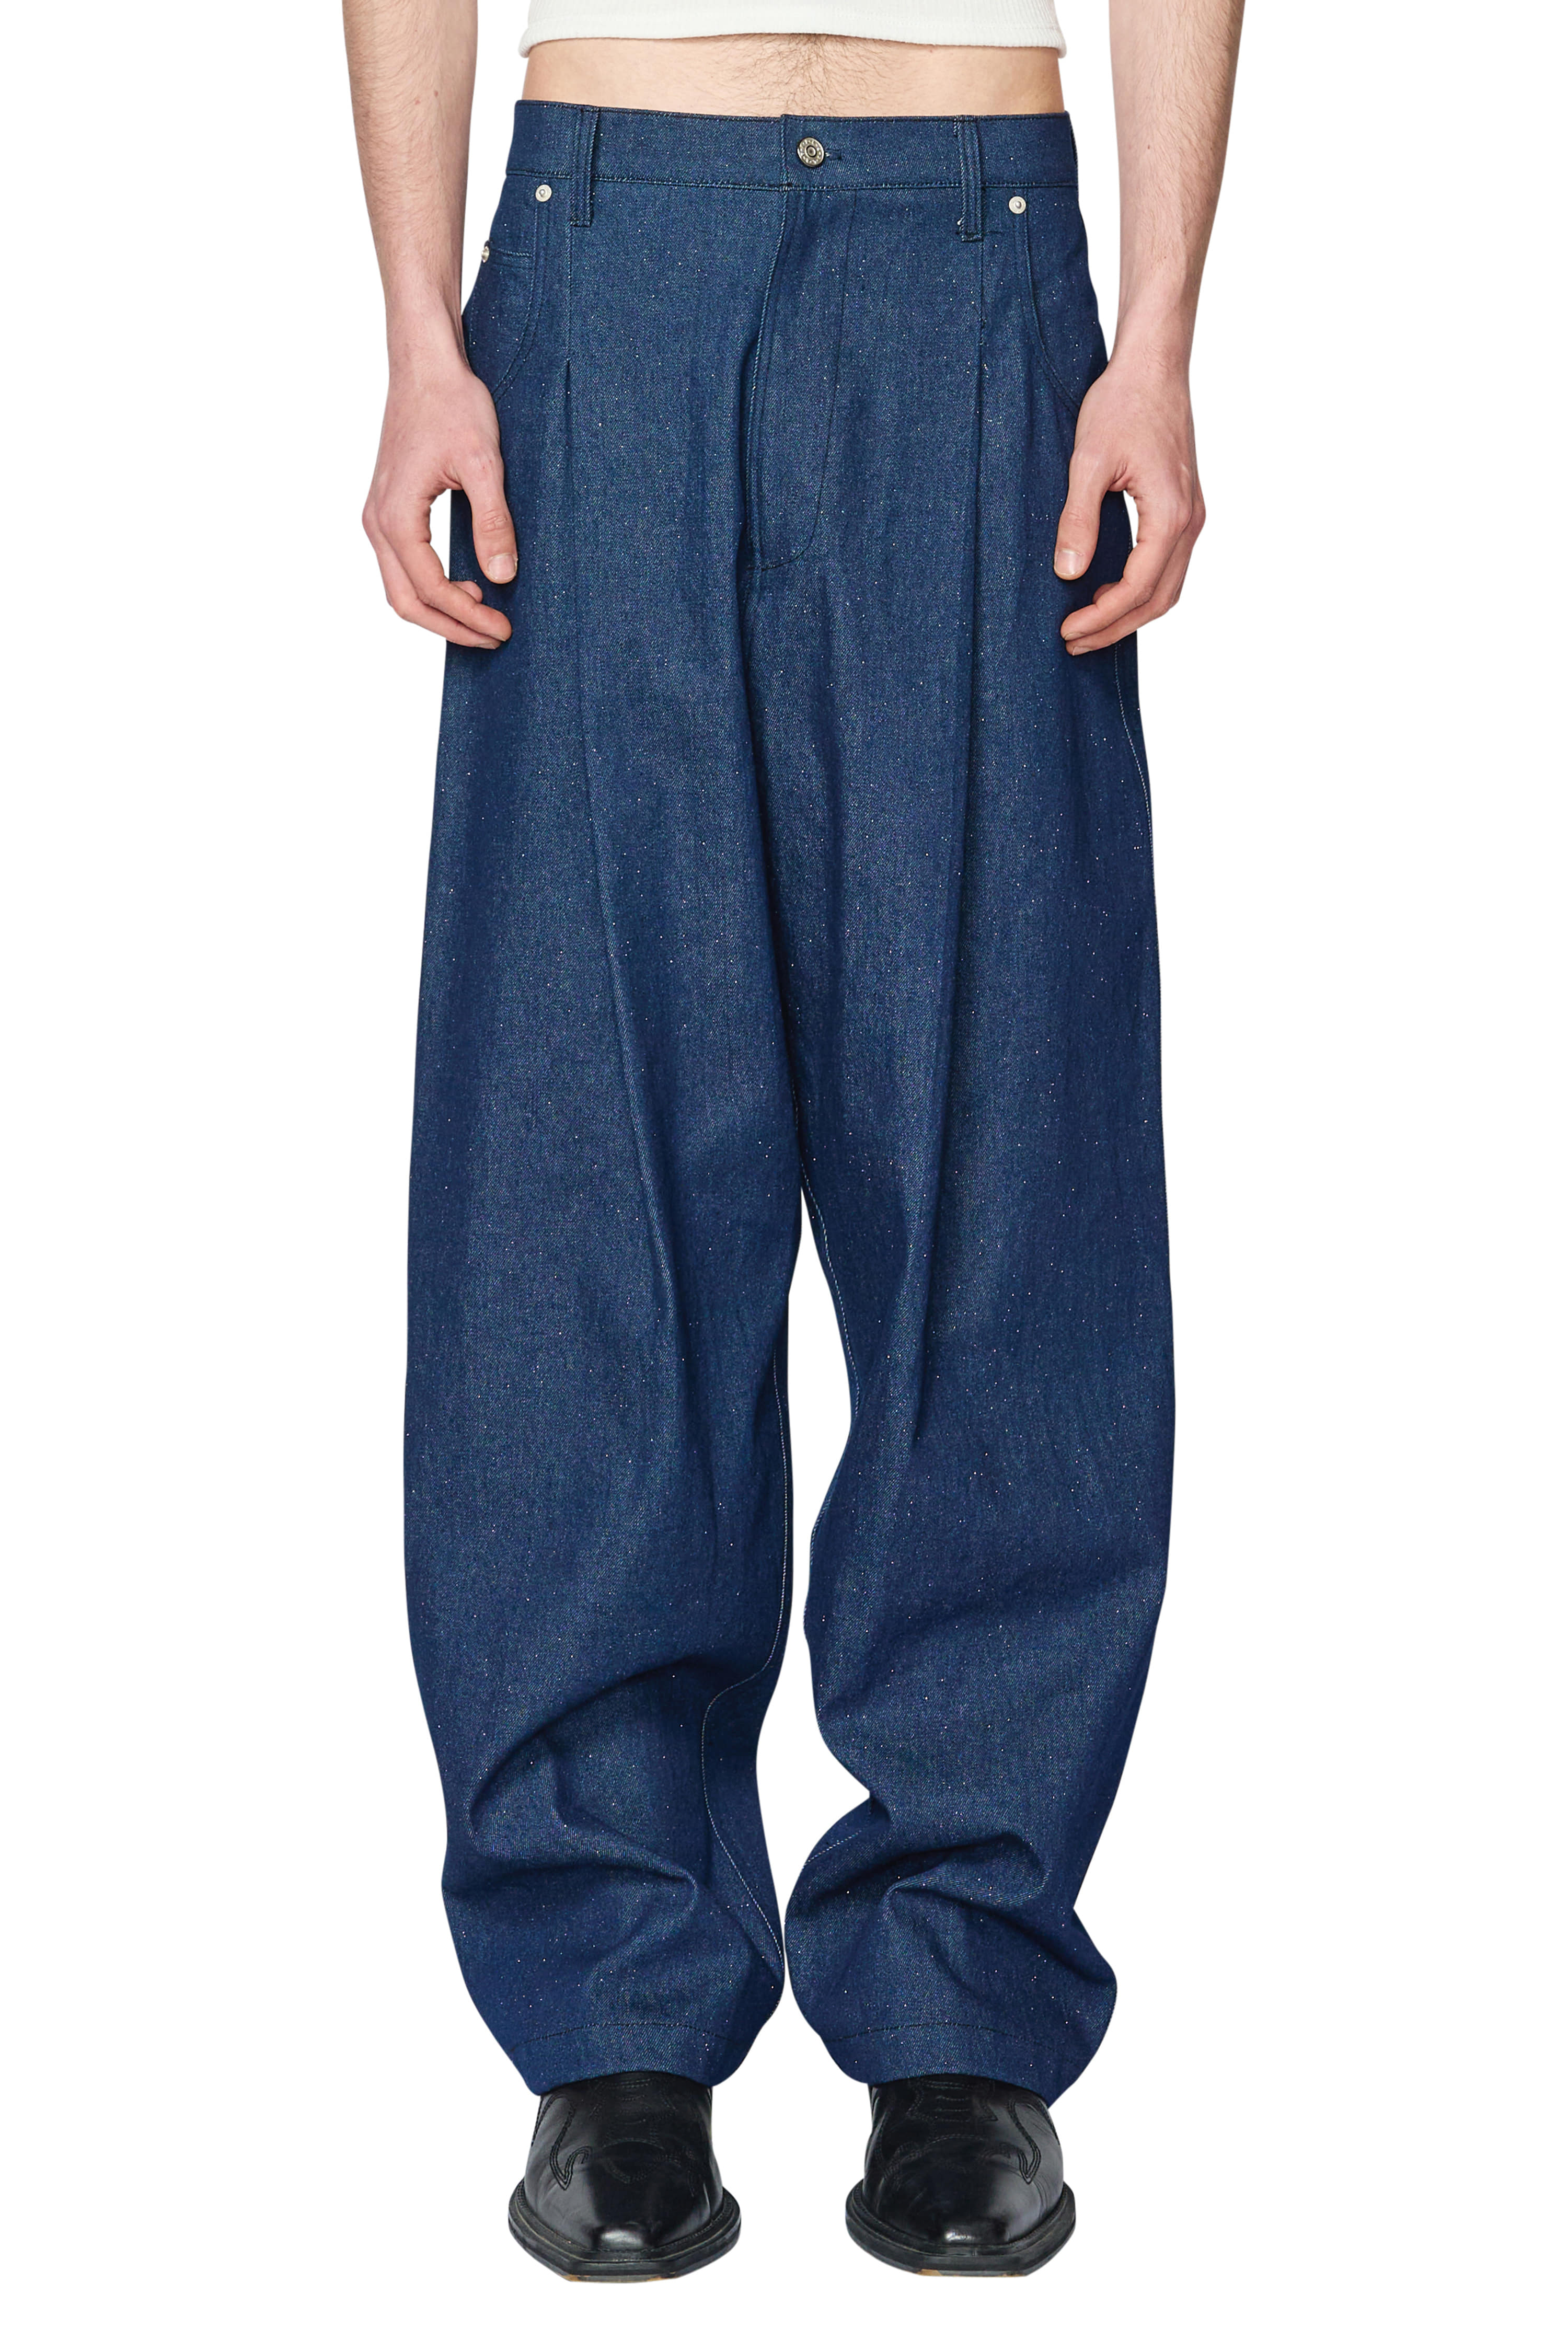 [ Delivery from 5/10 ] BLUE GLITTERY TUCKED DENIM TROUSERS